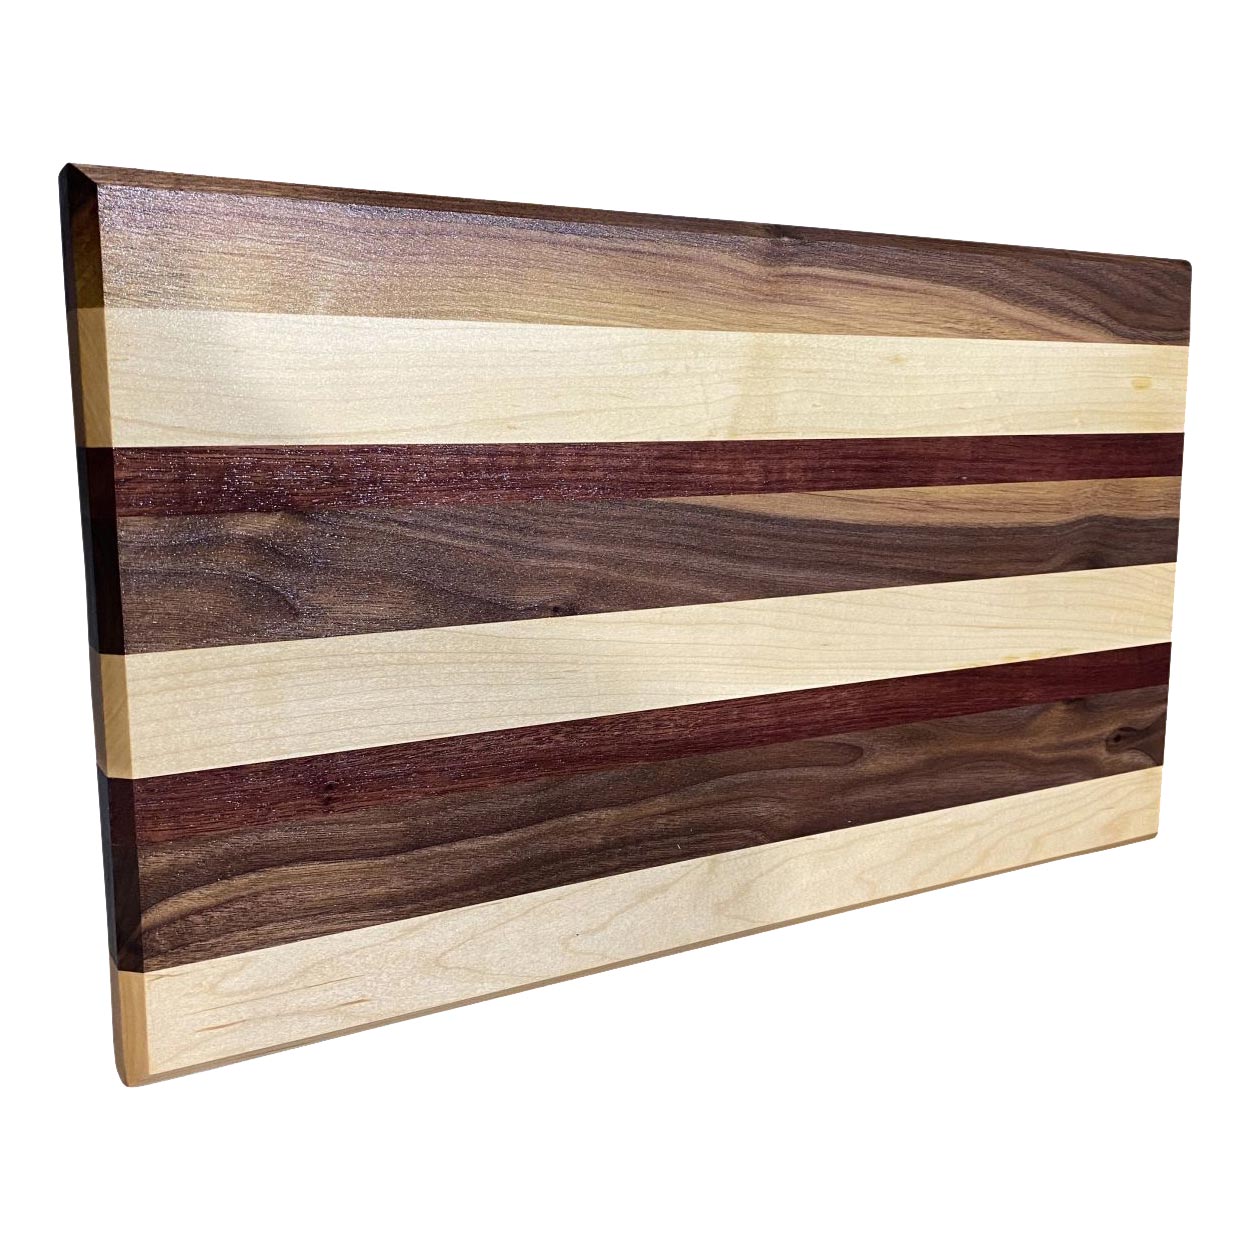 Montana Made Cutting Board with Handle in Walnut, Purpleheart and Cherry -  SMW Designs